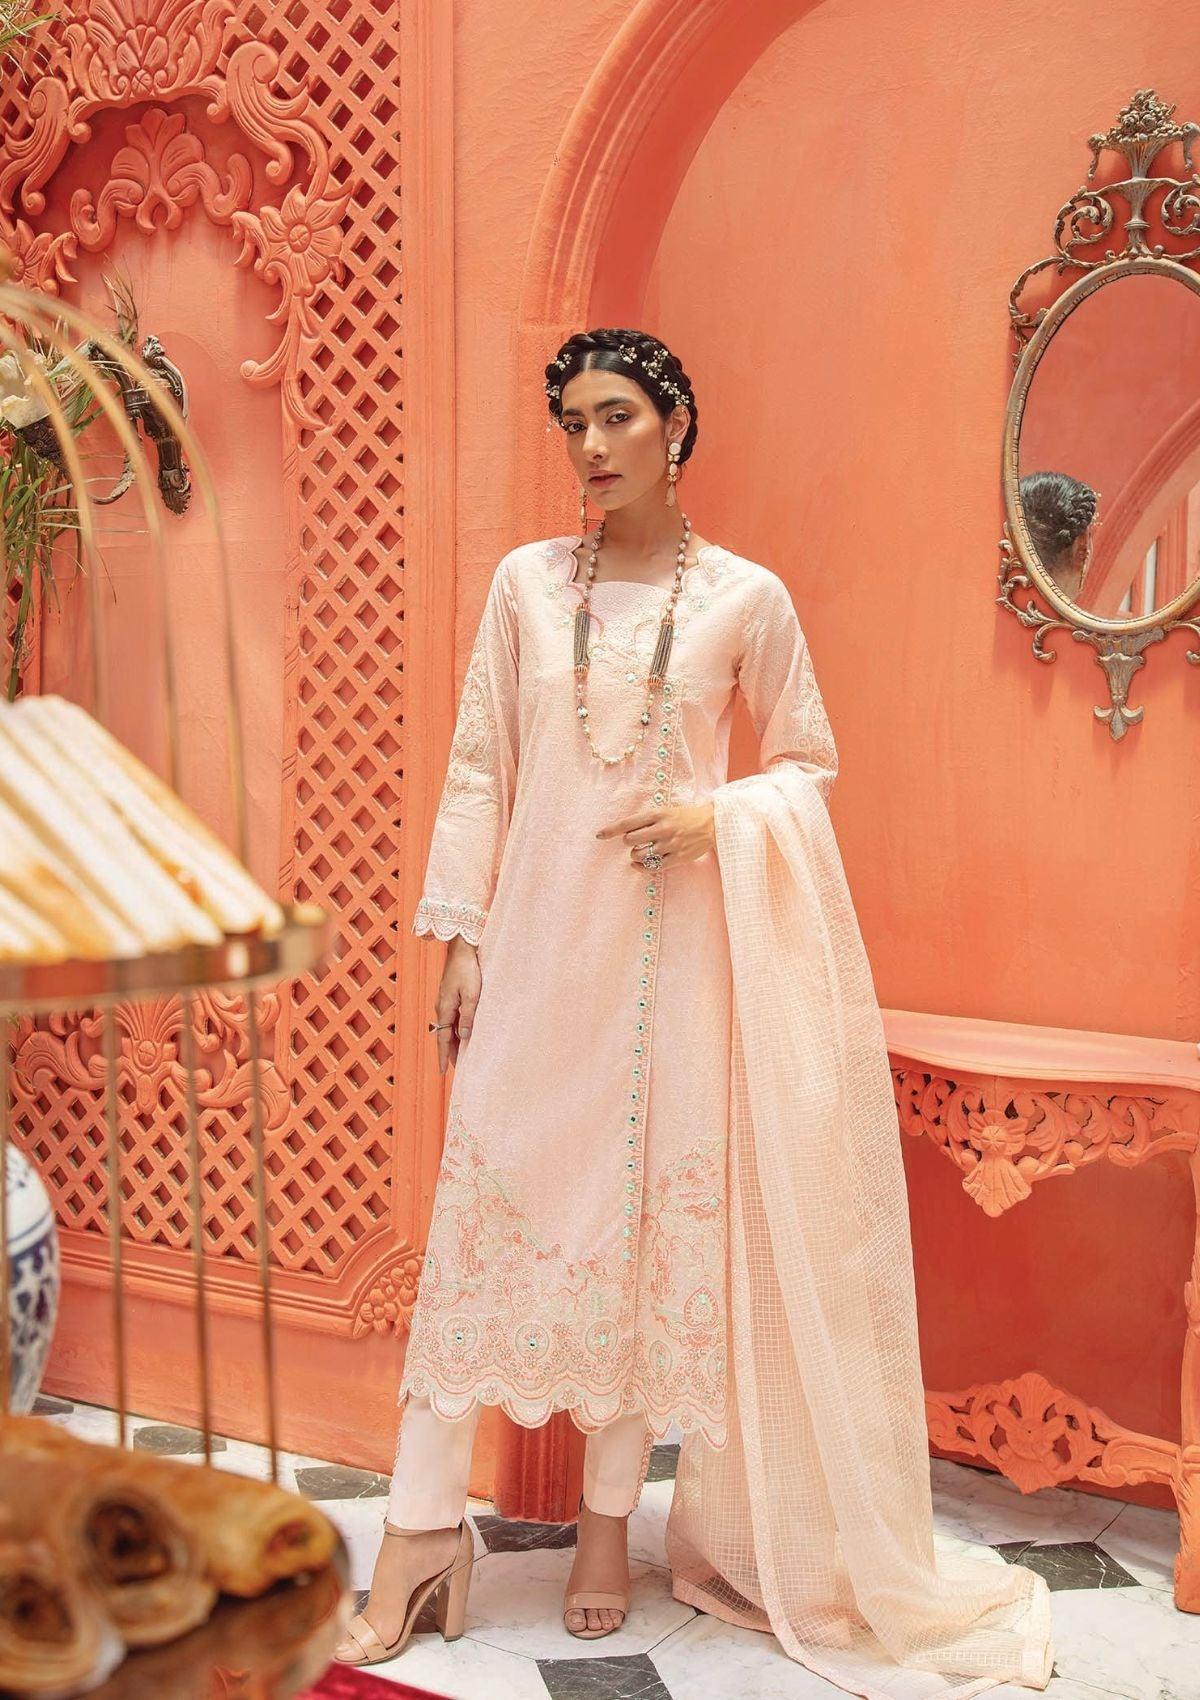 Nuriyaa Kana Yari Luxury Pret'22 ROSE CLAIR is available at Mohsin Saeed Fabrics. ✓ shop all the top women clothing brands in pakistan ✓ Best Price and Offers ✓ Free Shipping ✓ Cash on Delivery ✓ formal & Wedding Collections 